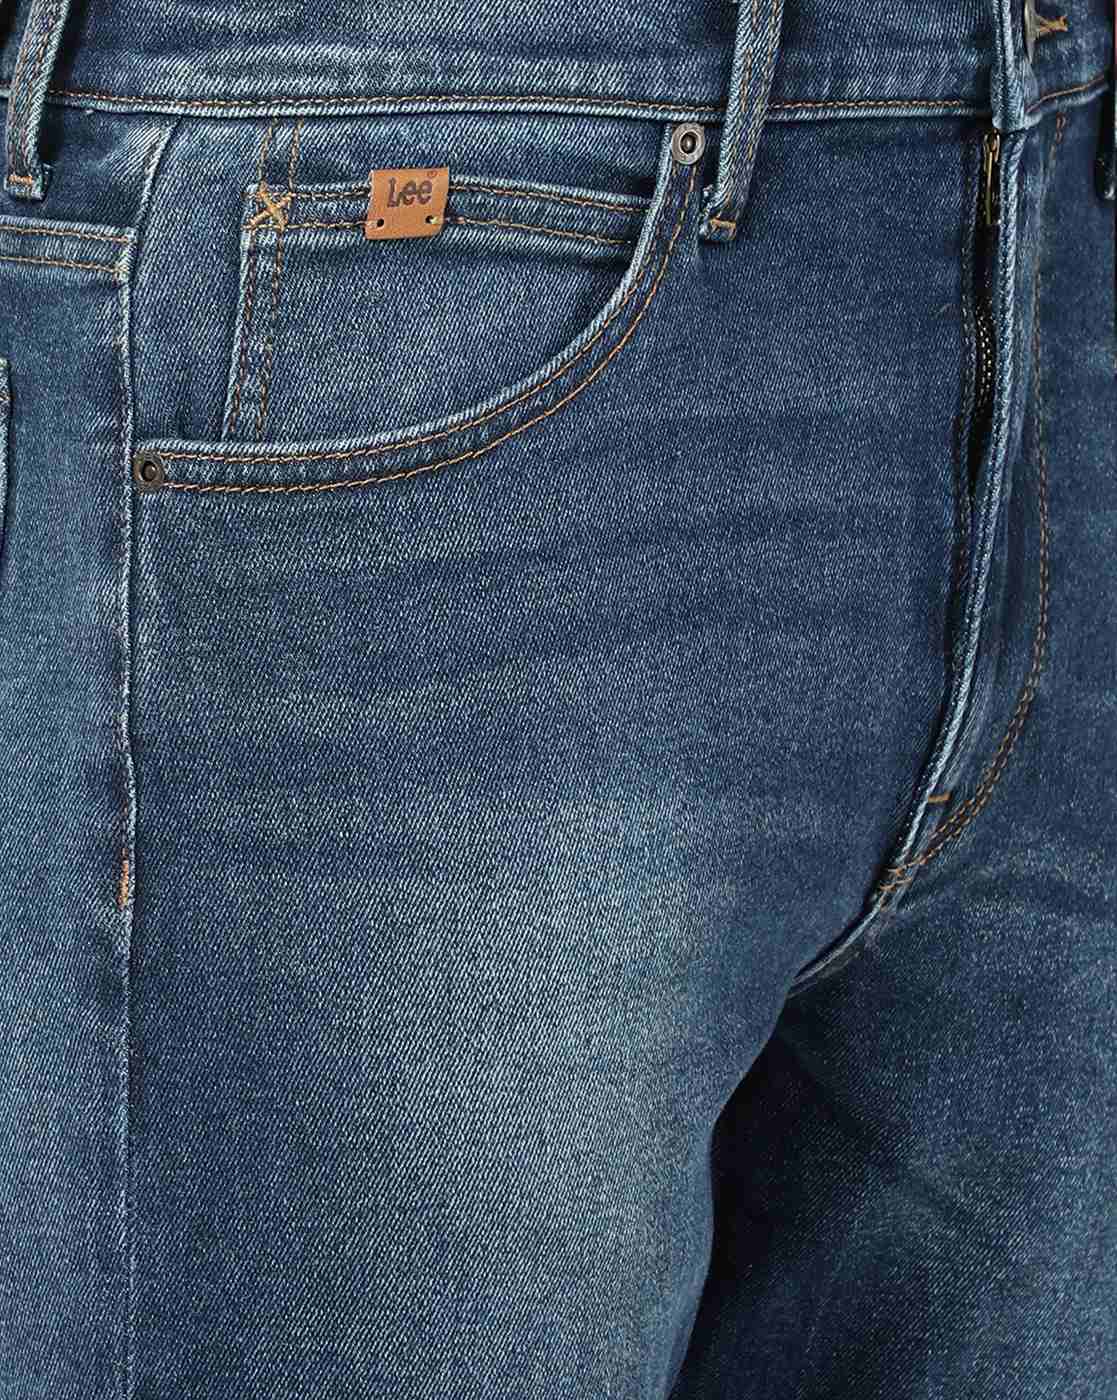 Lee Jeans - Carpenter - Worn Wash » Prompt Shipping